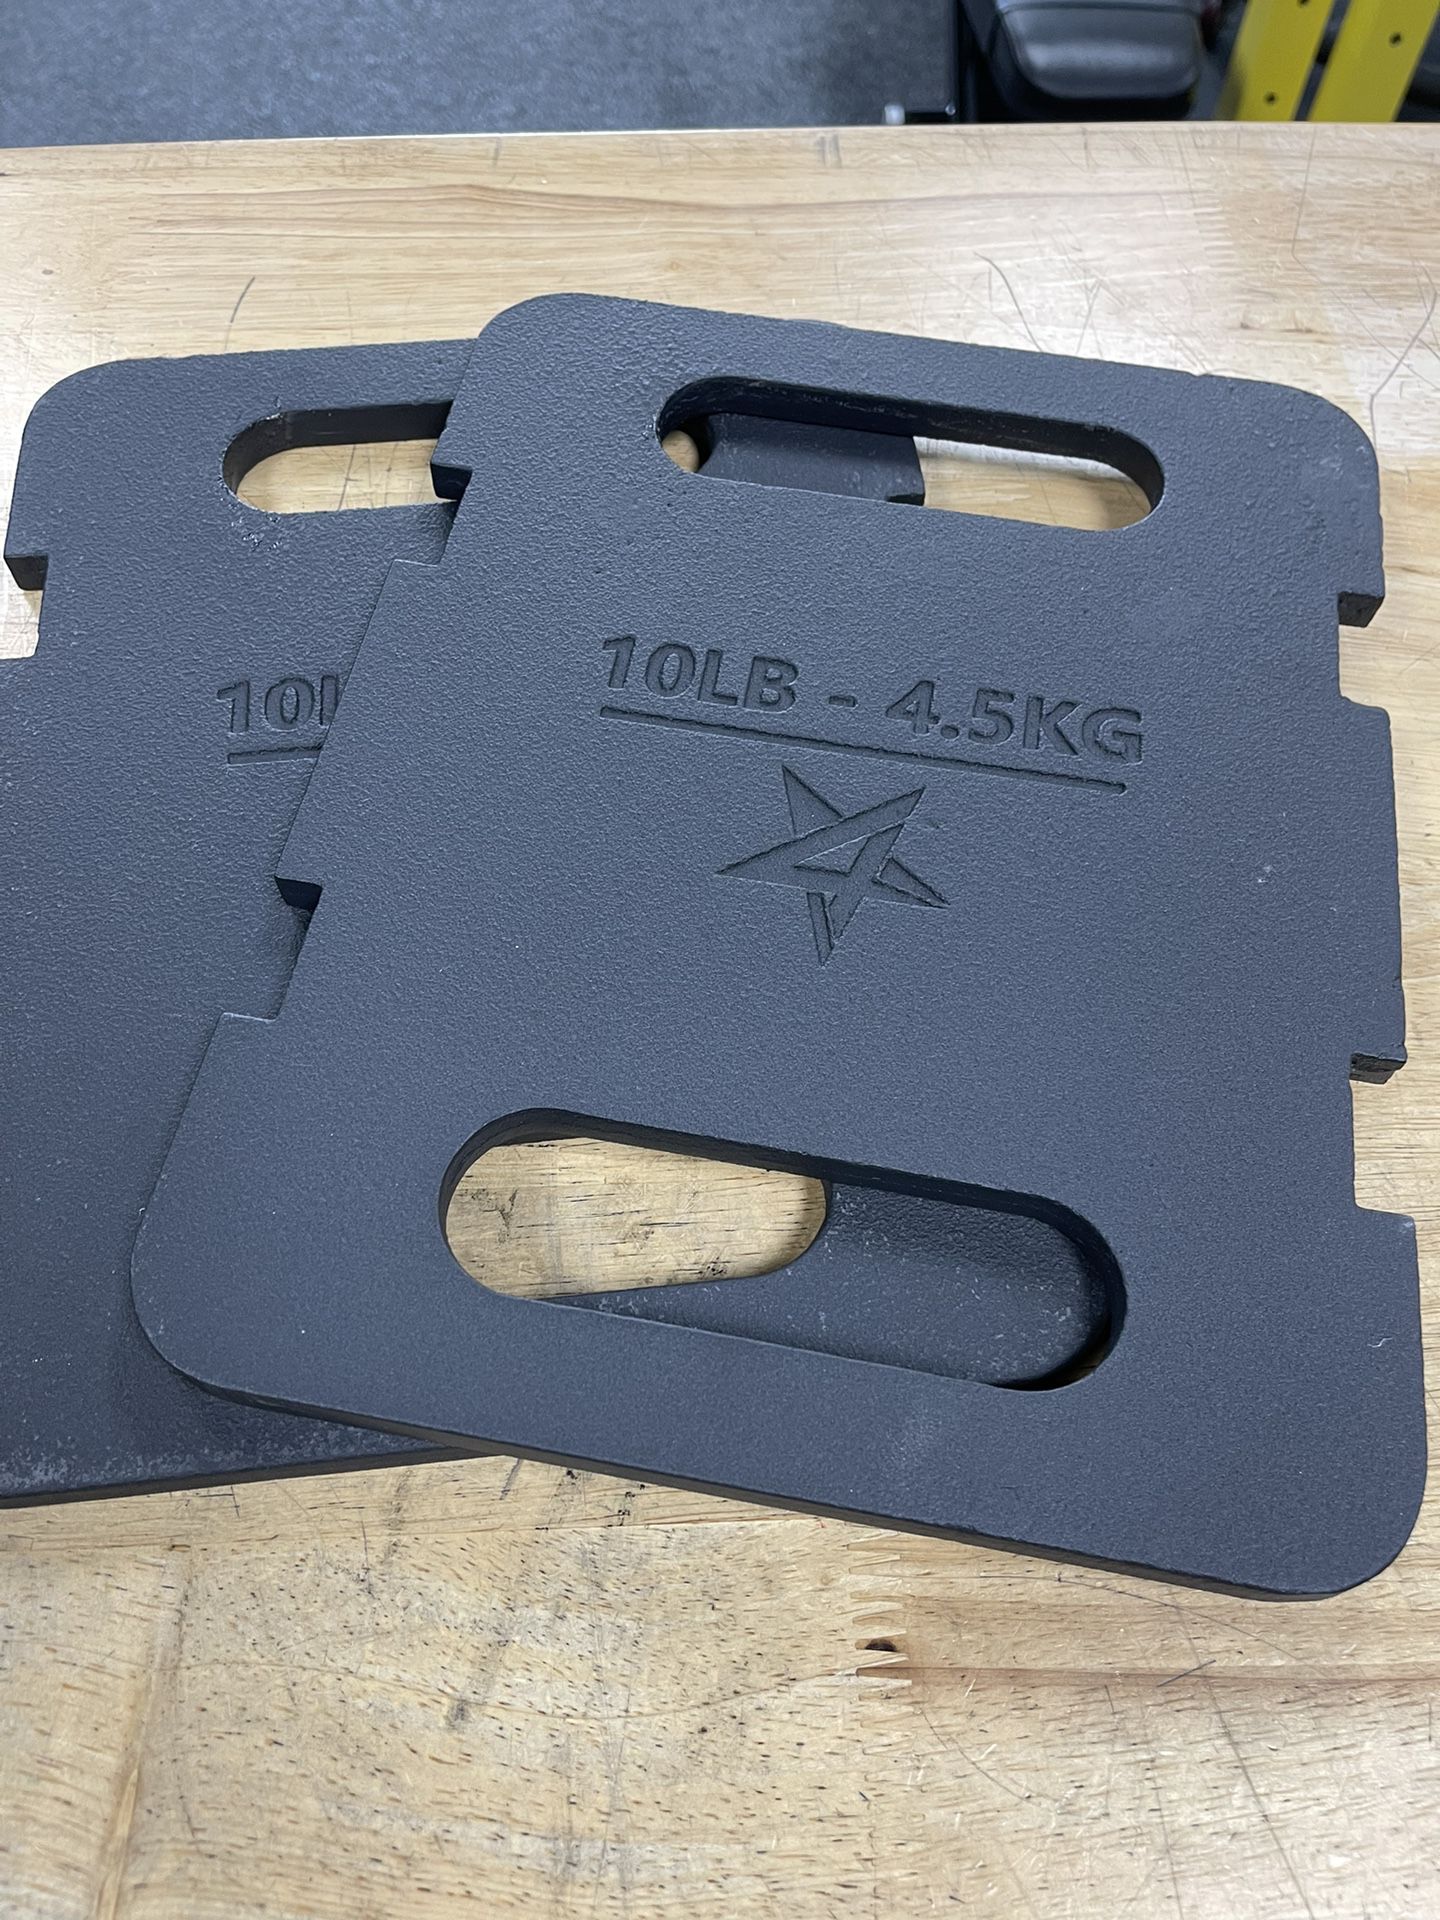 WEIGHT VEST PLATES🔹SPORTS FITNESS GYM EQUIPMENT 